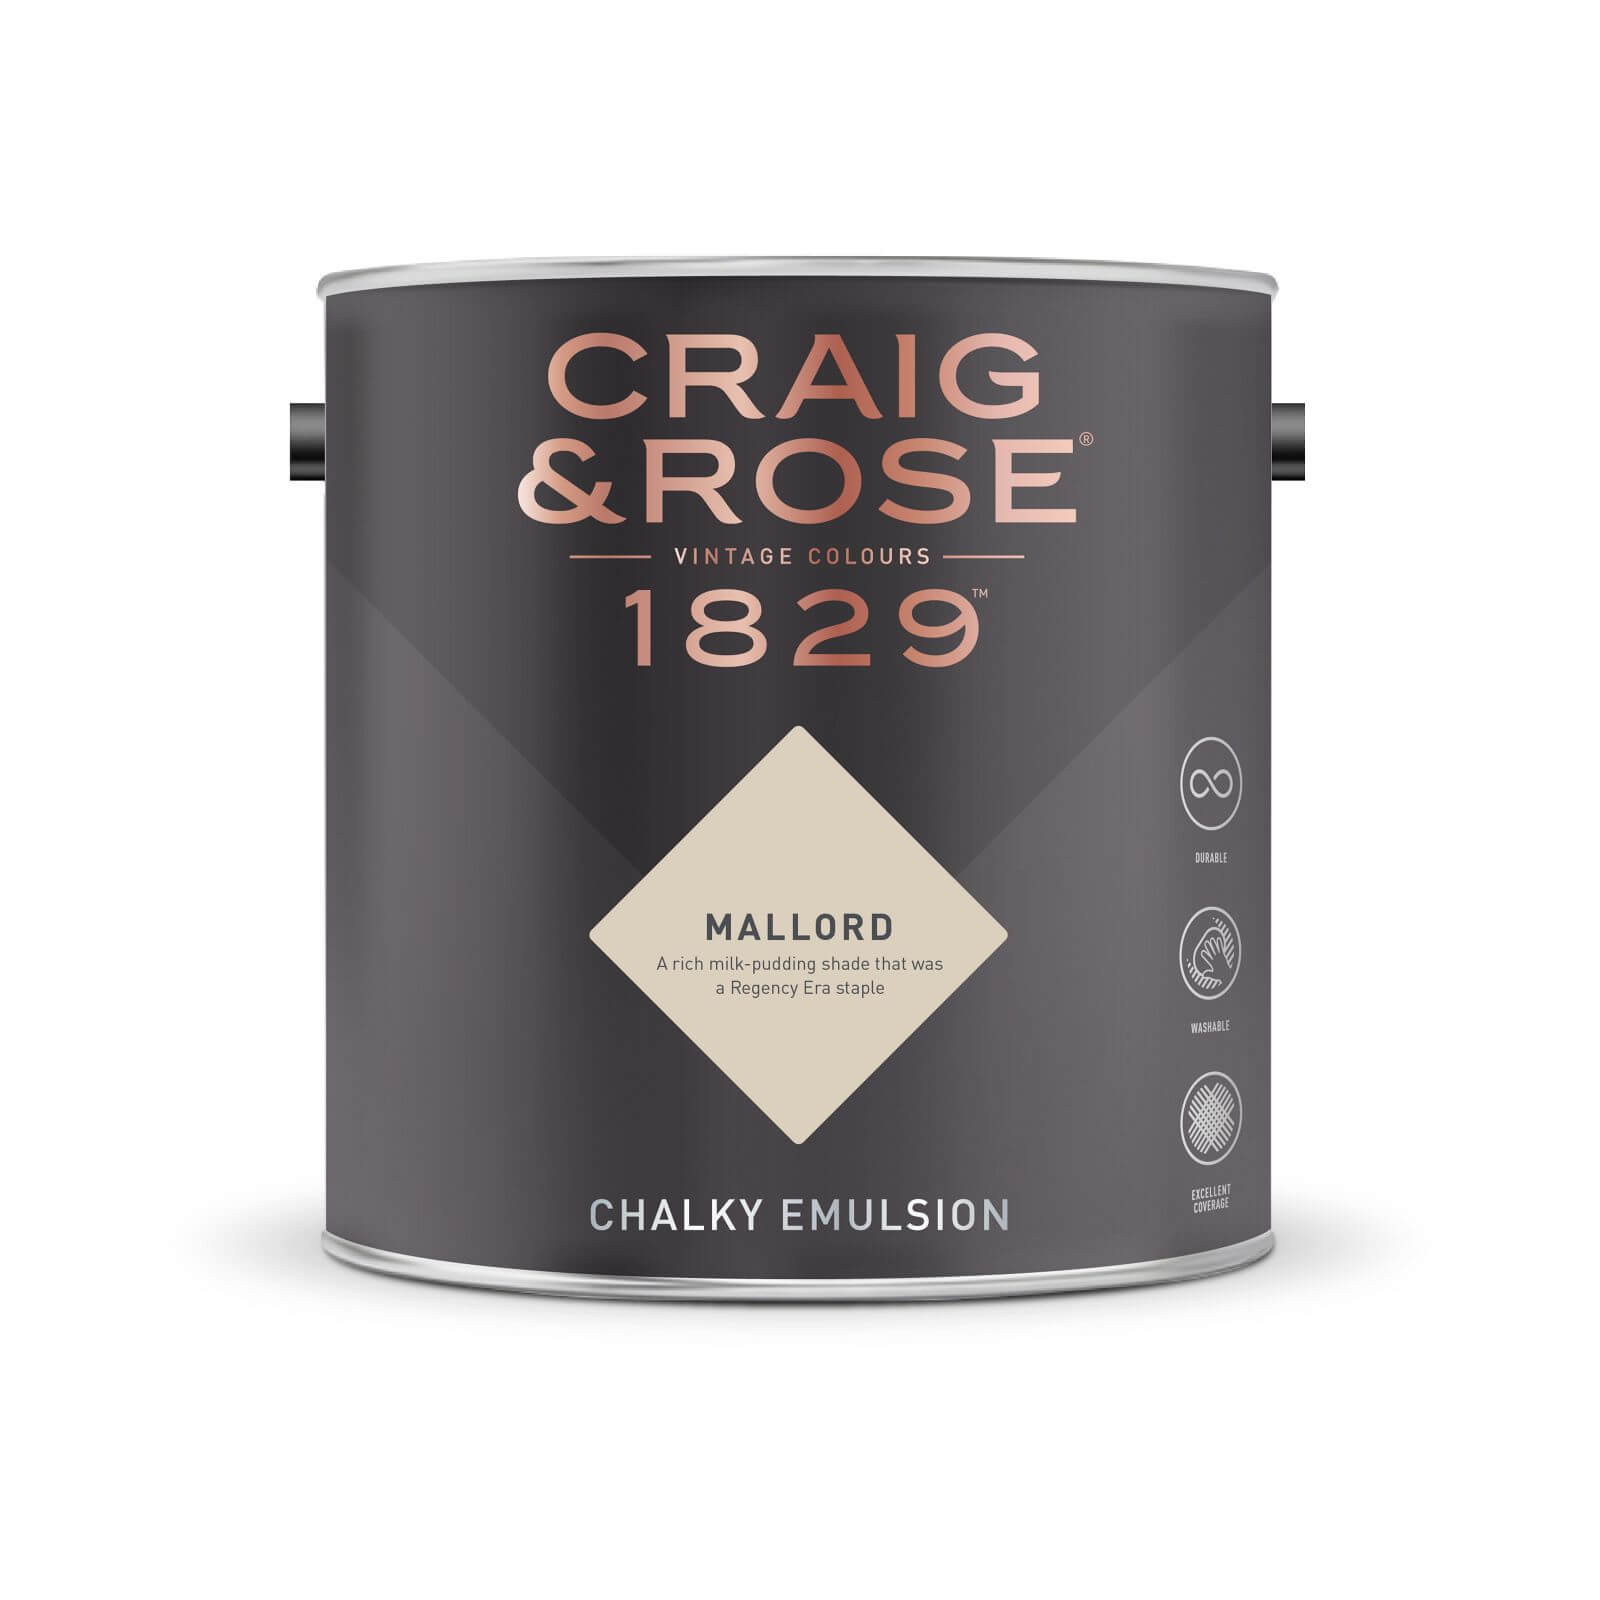 Craig & Rose 1829 Chalky Emulsion Paint Mallord - 5L